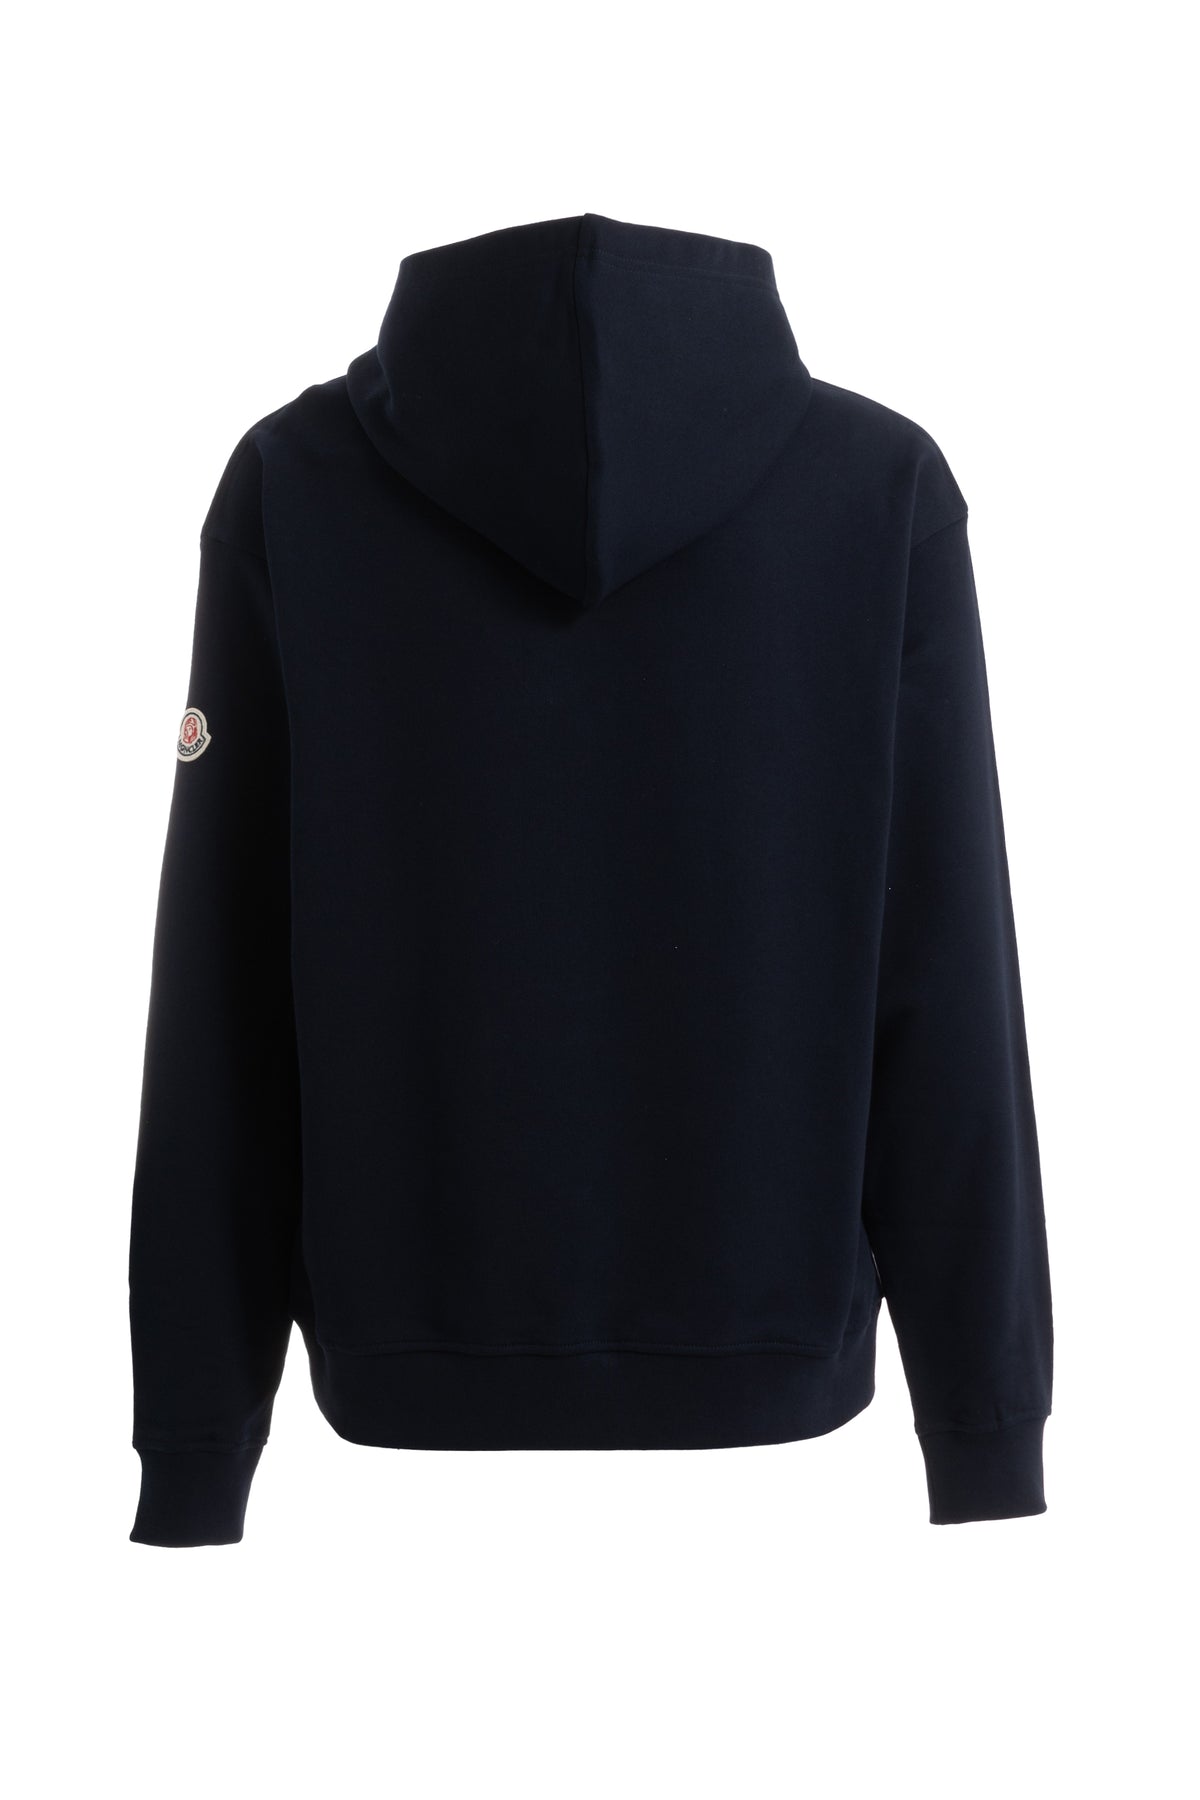 HOODIE SWEATER / NVY